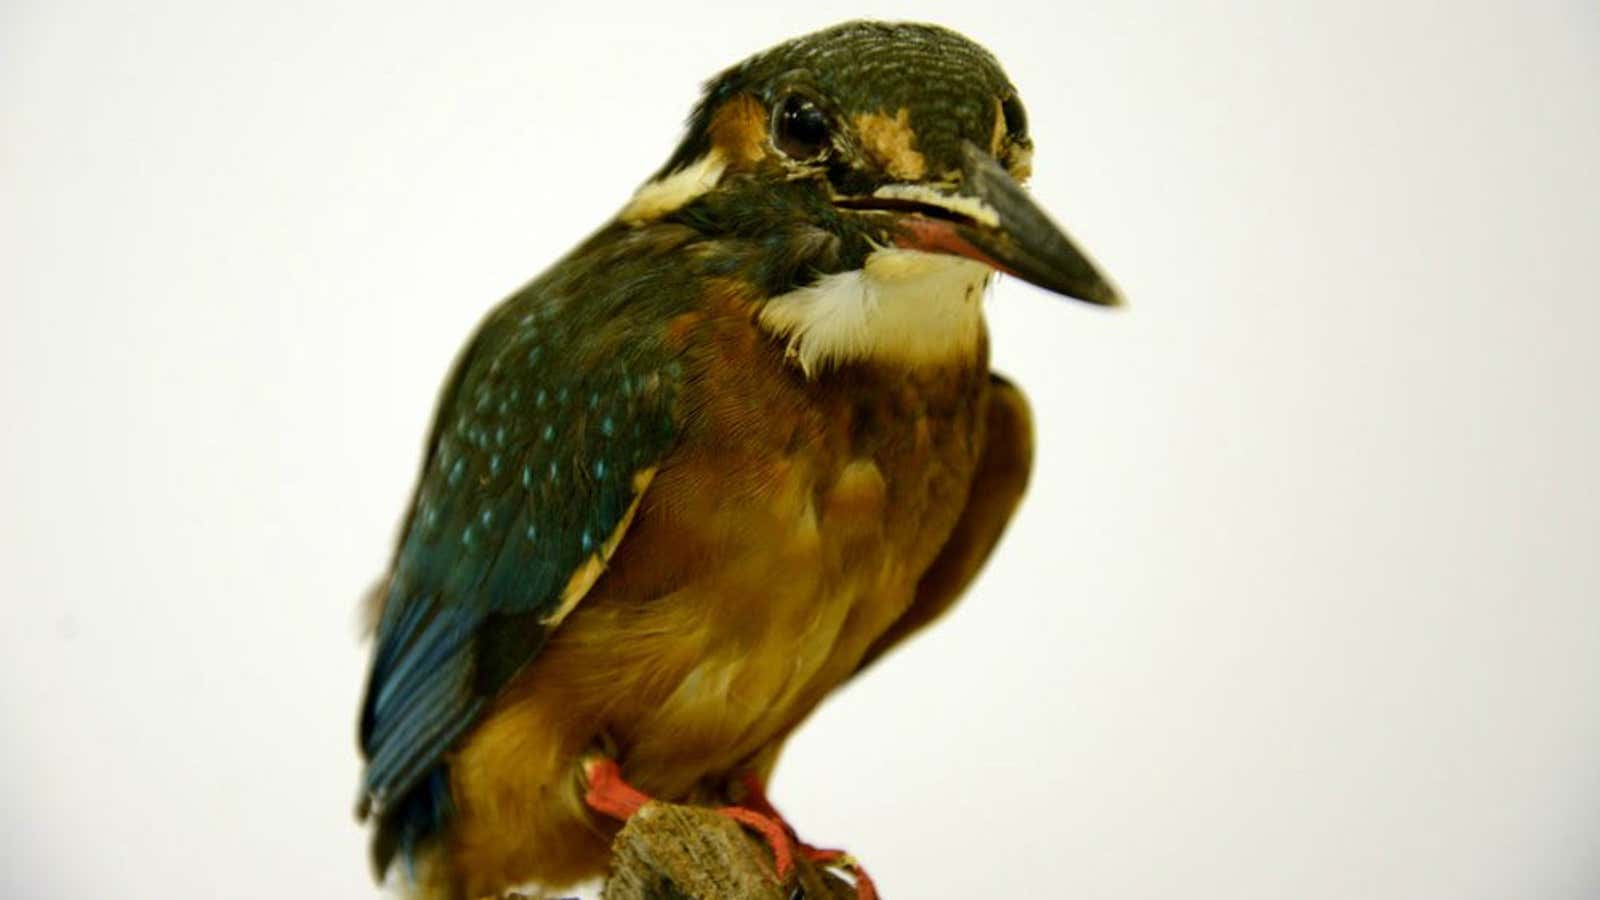 A taxidermied kingfisher from a museum collection.